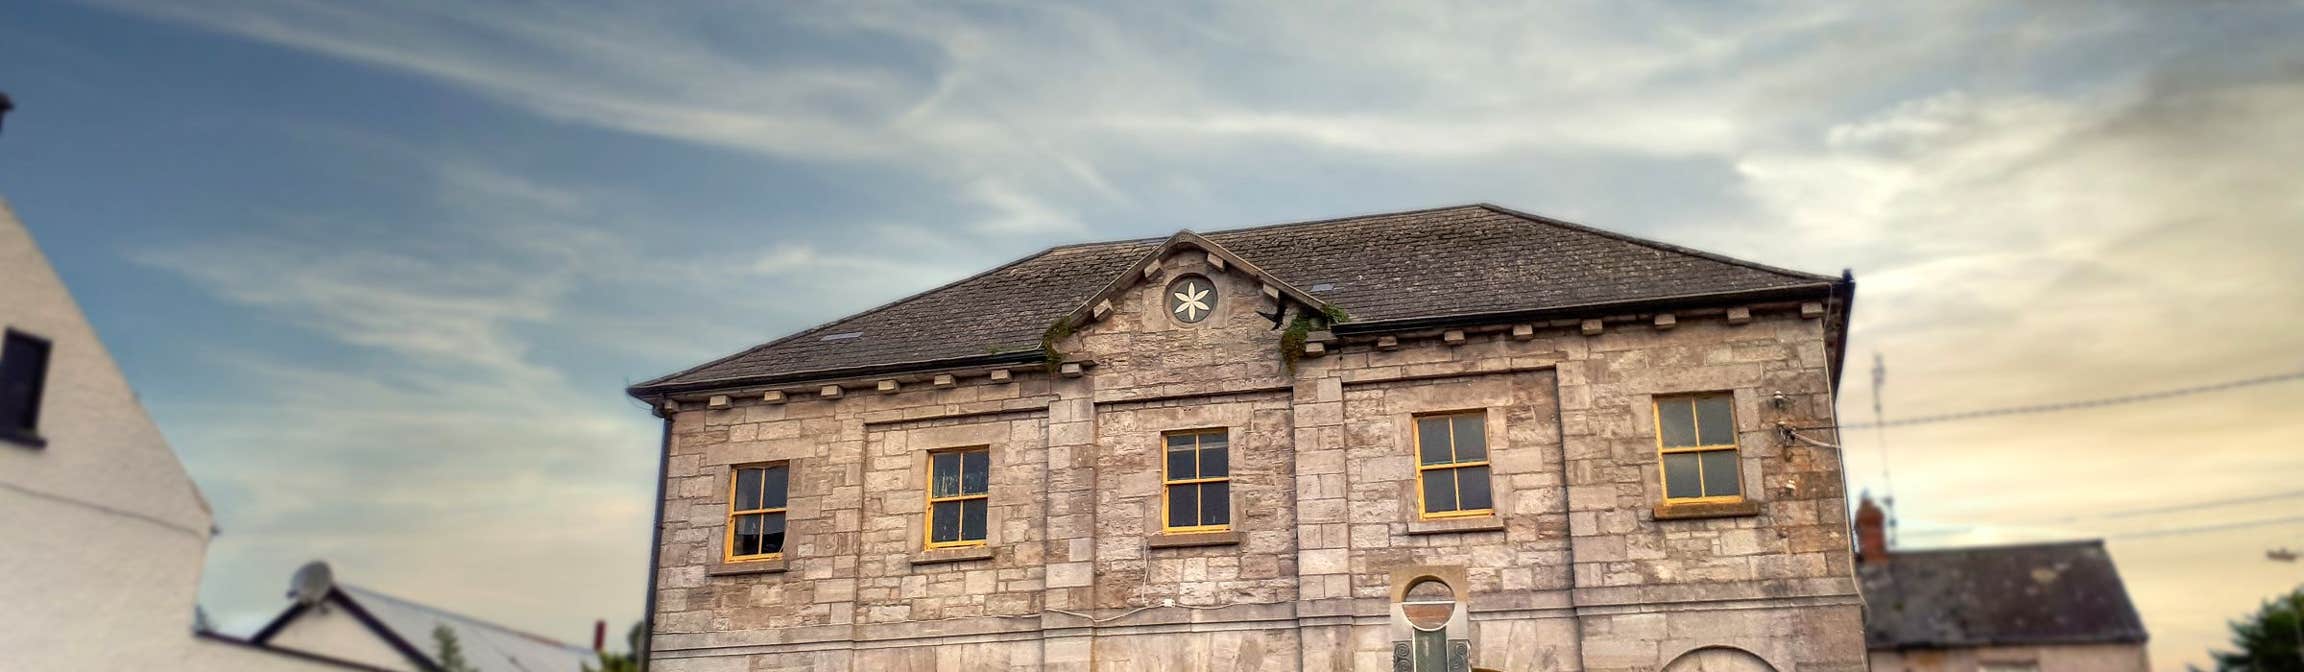 Image of a building in Ballyconnell in County Cavan